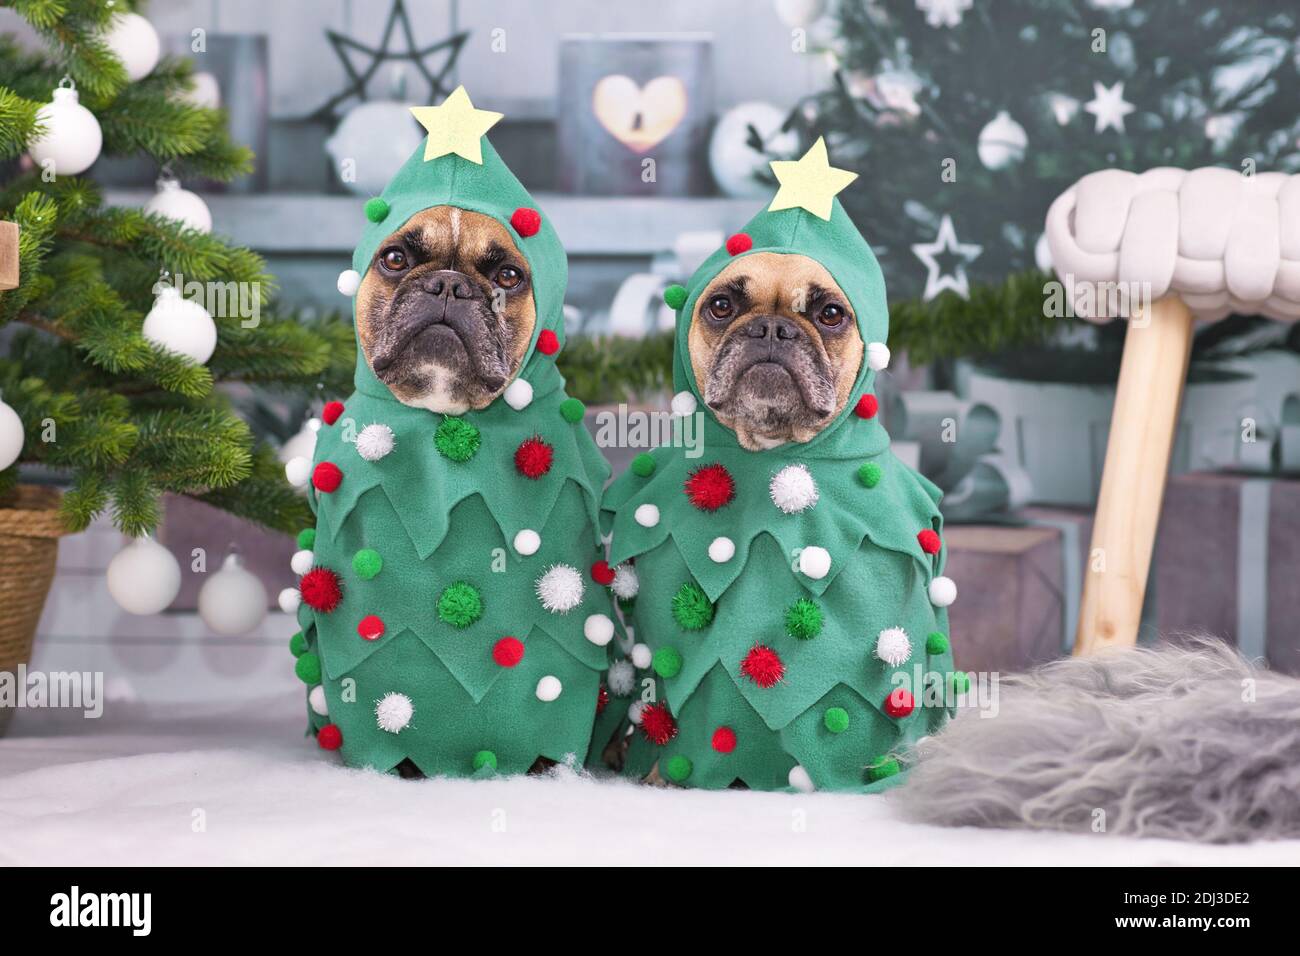 Funny French Bulldog dogs wearing Christmas tree costumes between Christmas trees and gift boxes Stock Photo